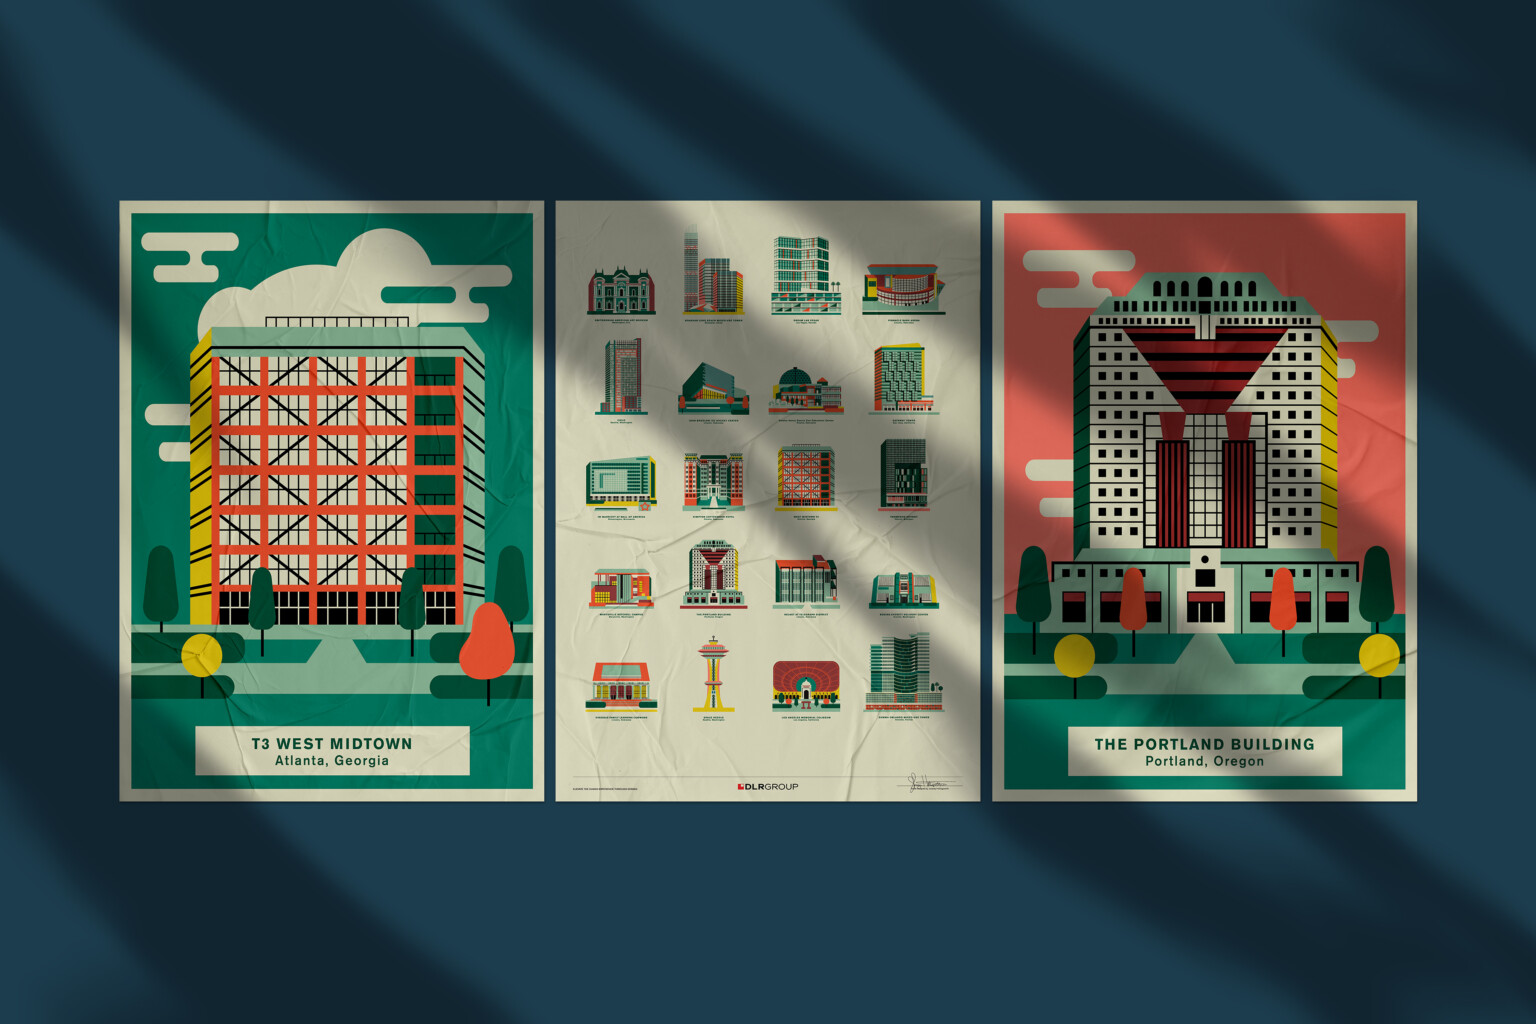 DLR Group designed buildings in a stylized poster series